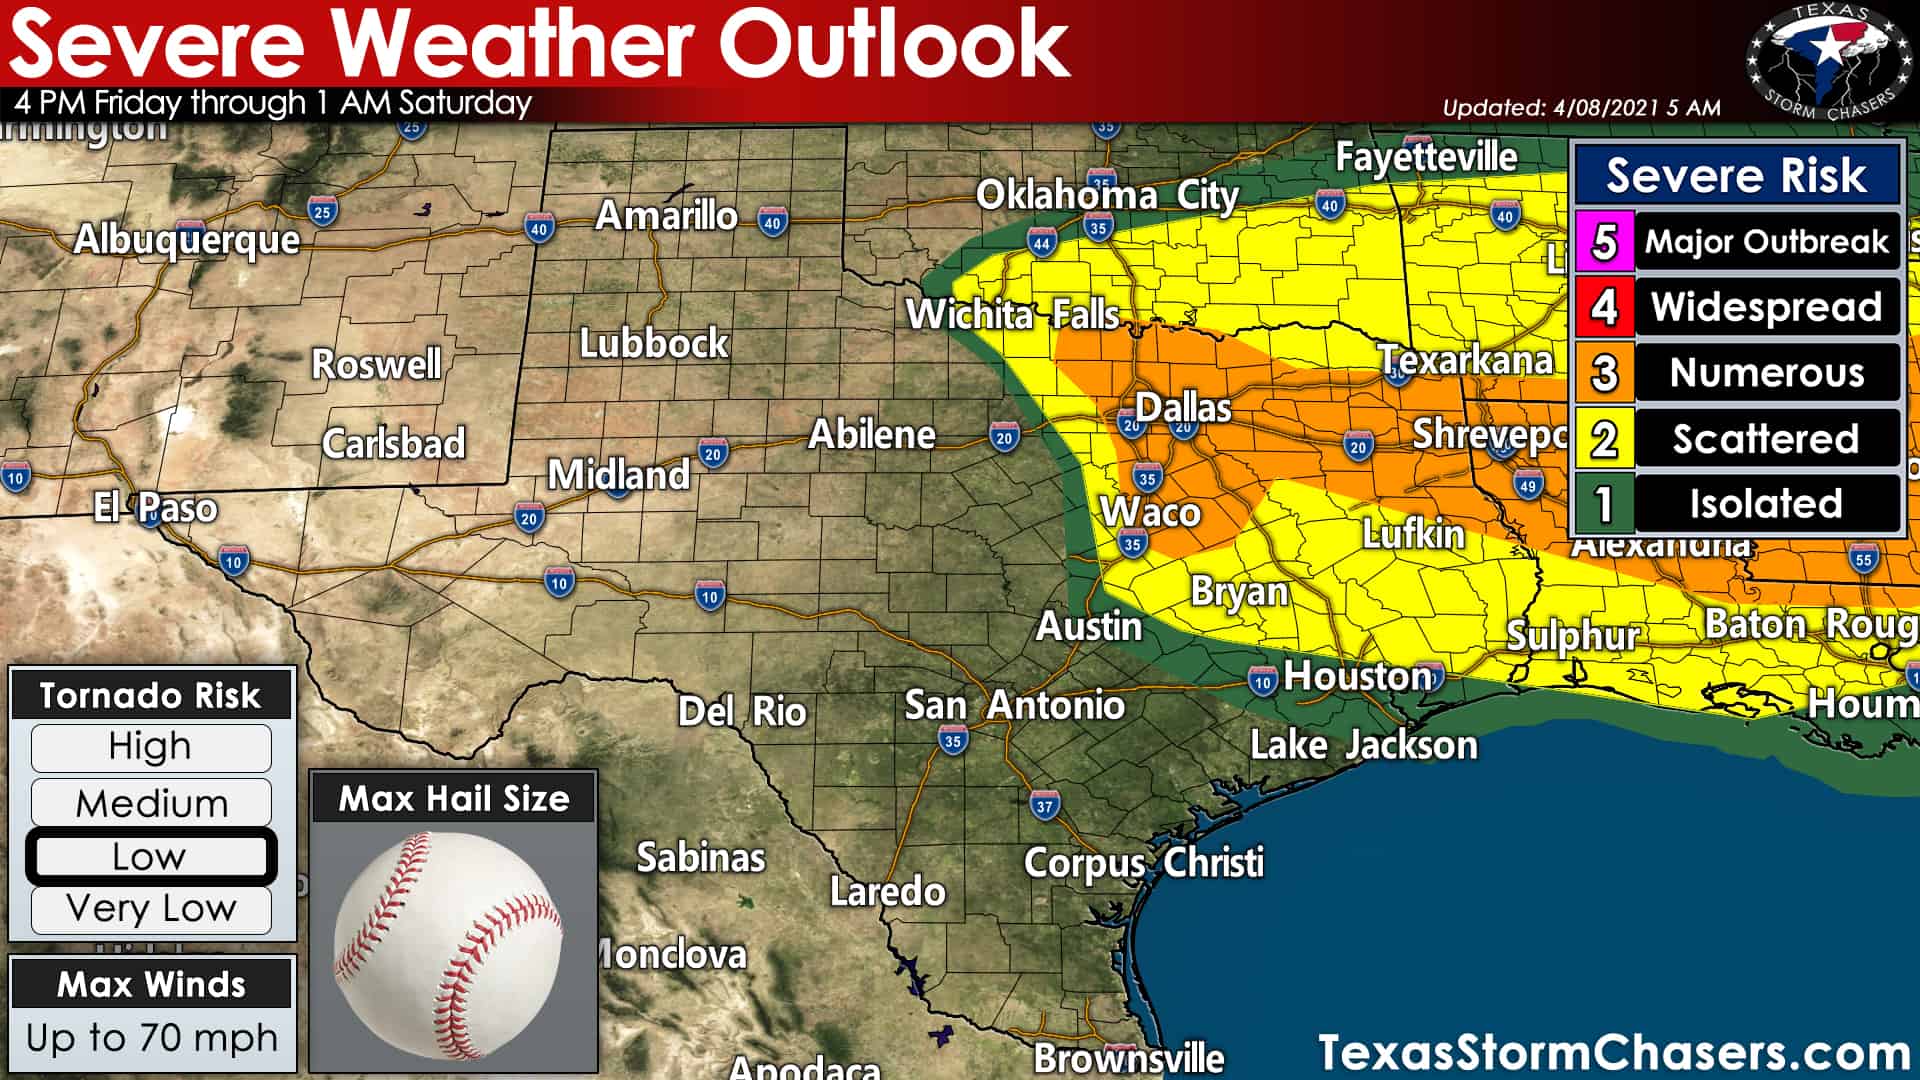 Severe storms tomorrow evening in North & East Texas